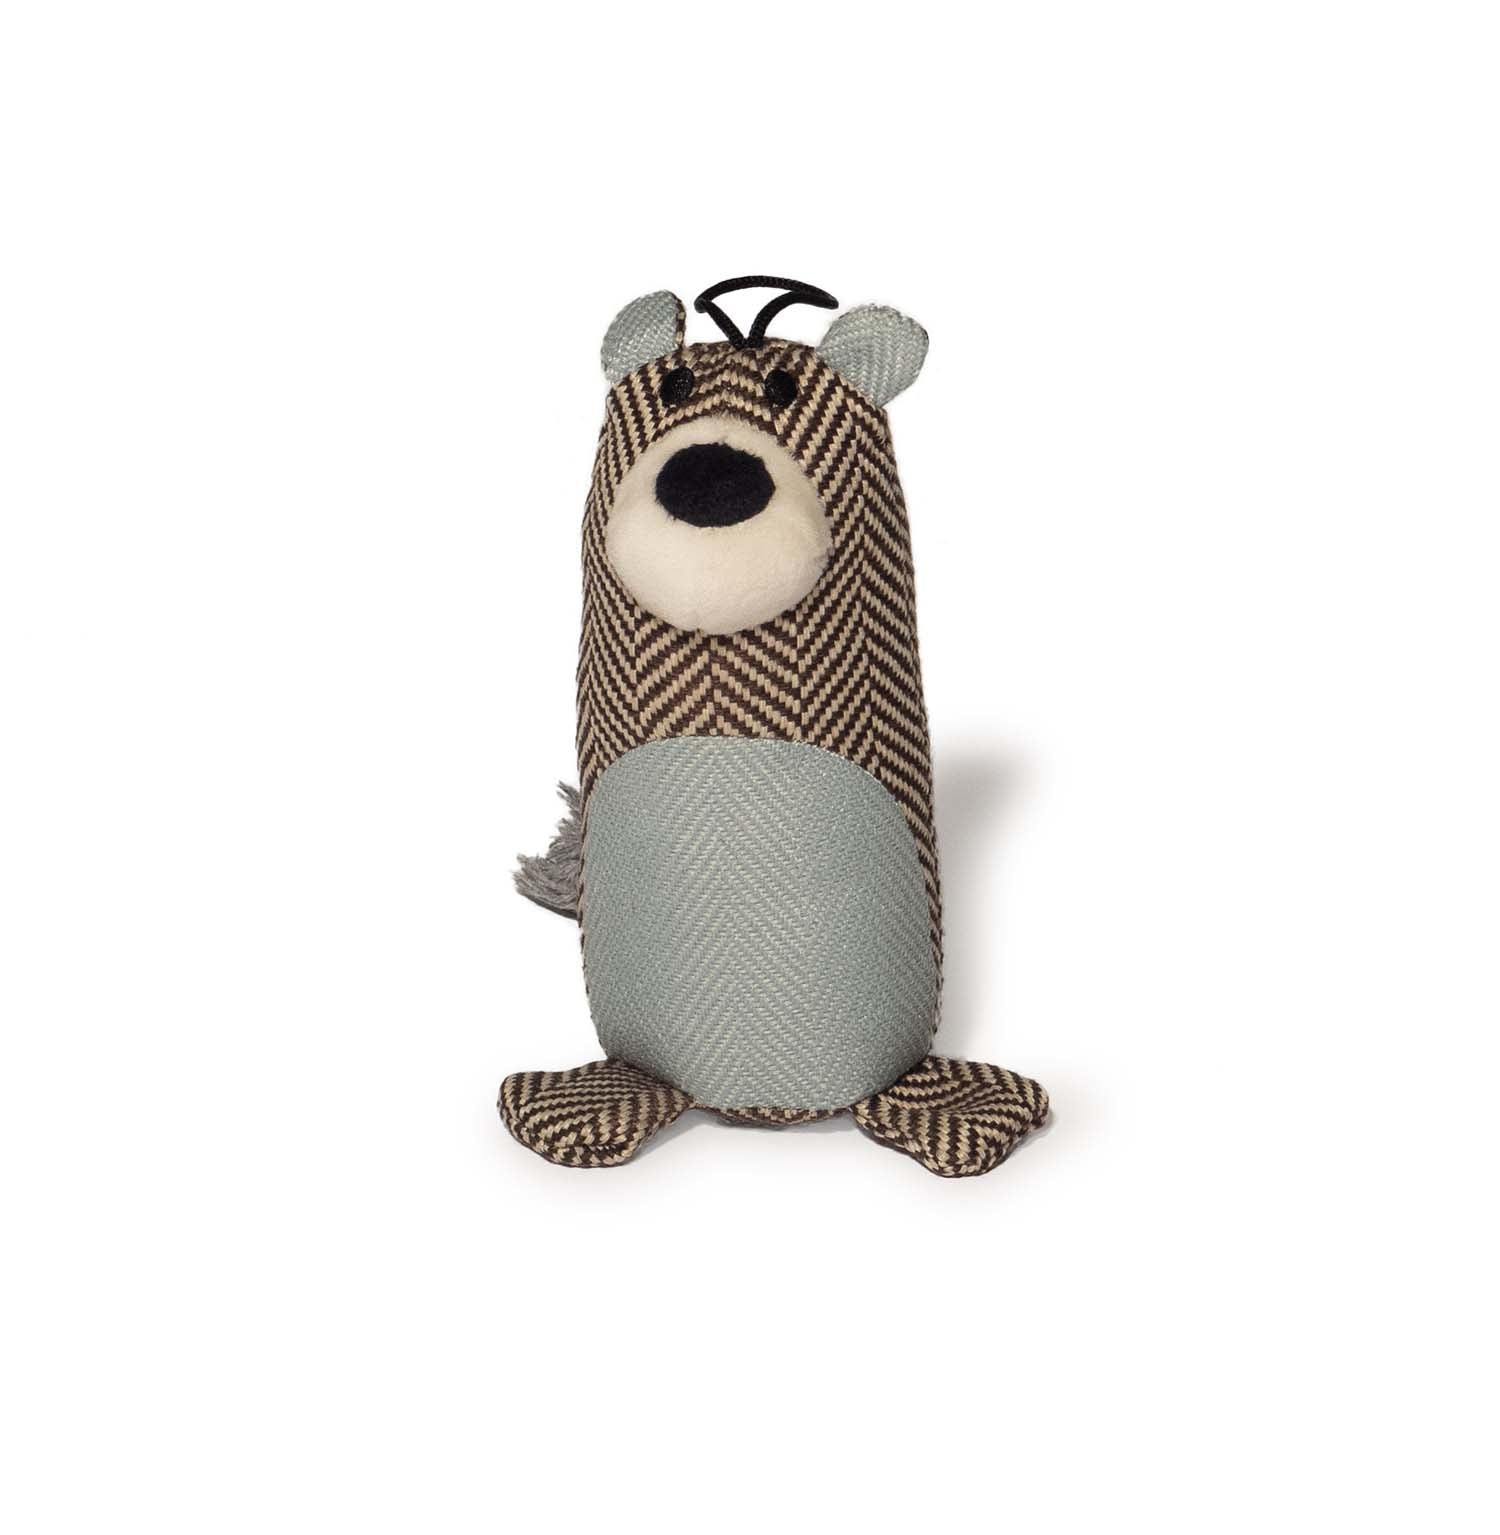 Beatrice The Bear Dog Toy by Danish Design